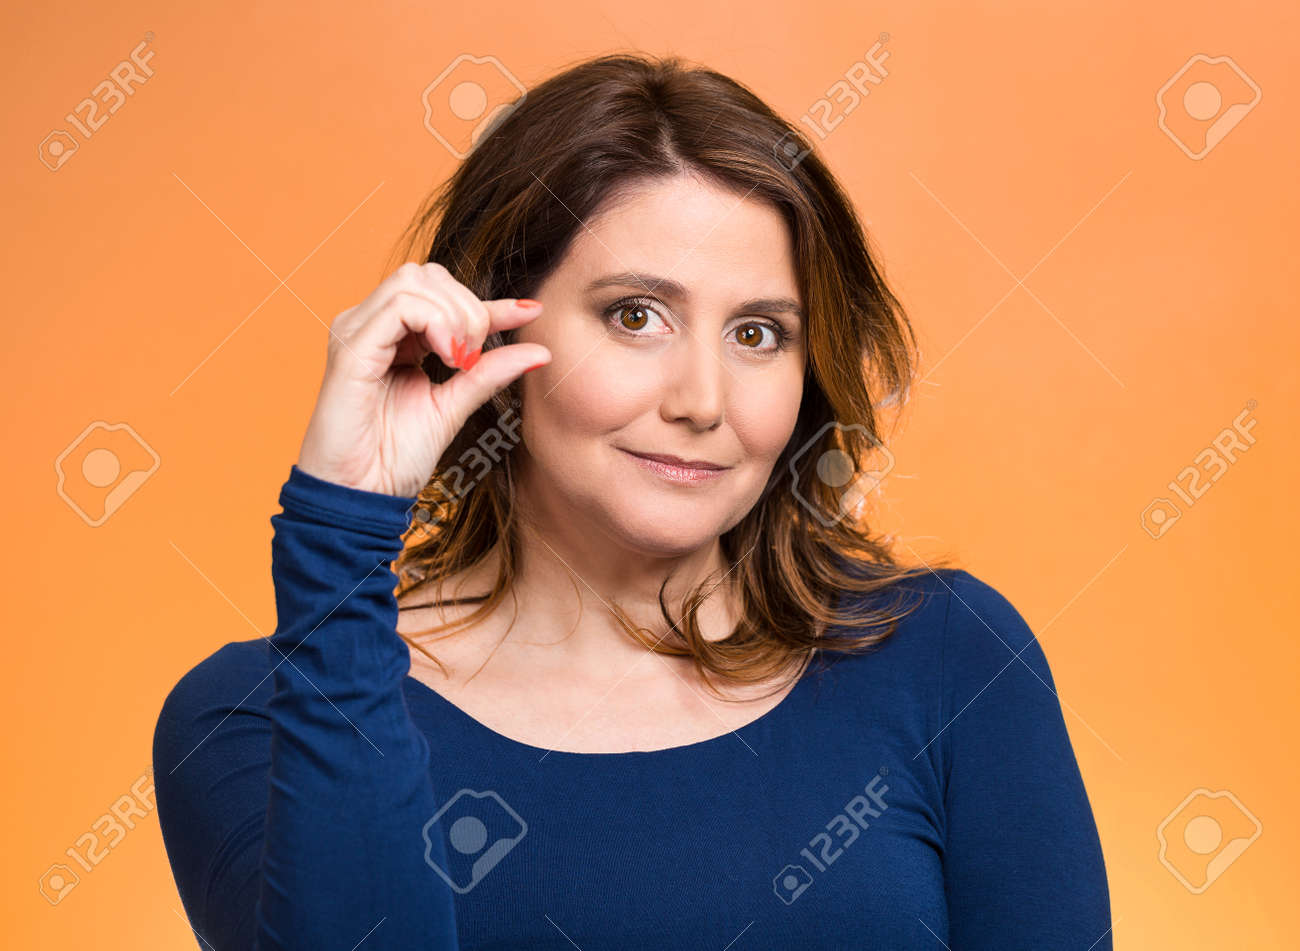 31160087-Closeup-portrait-young-middle-aged-woman-showing-small-amount-gesture-with-hands-isolated-orange-bac-Stock-Photo.jpg